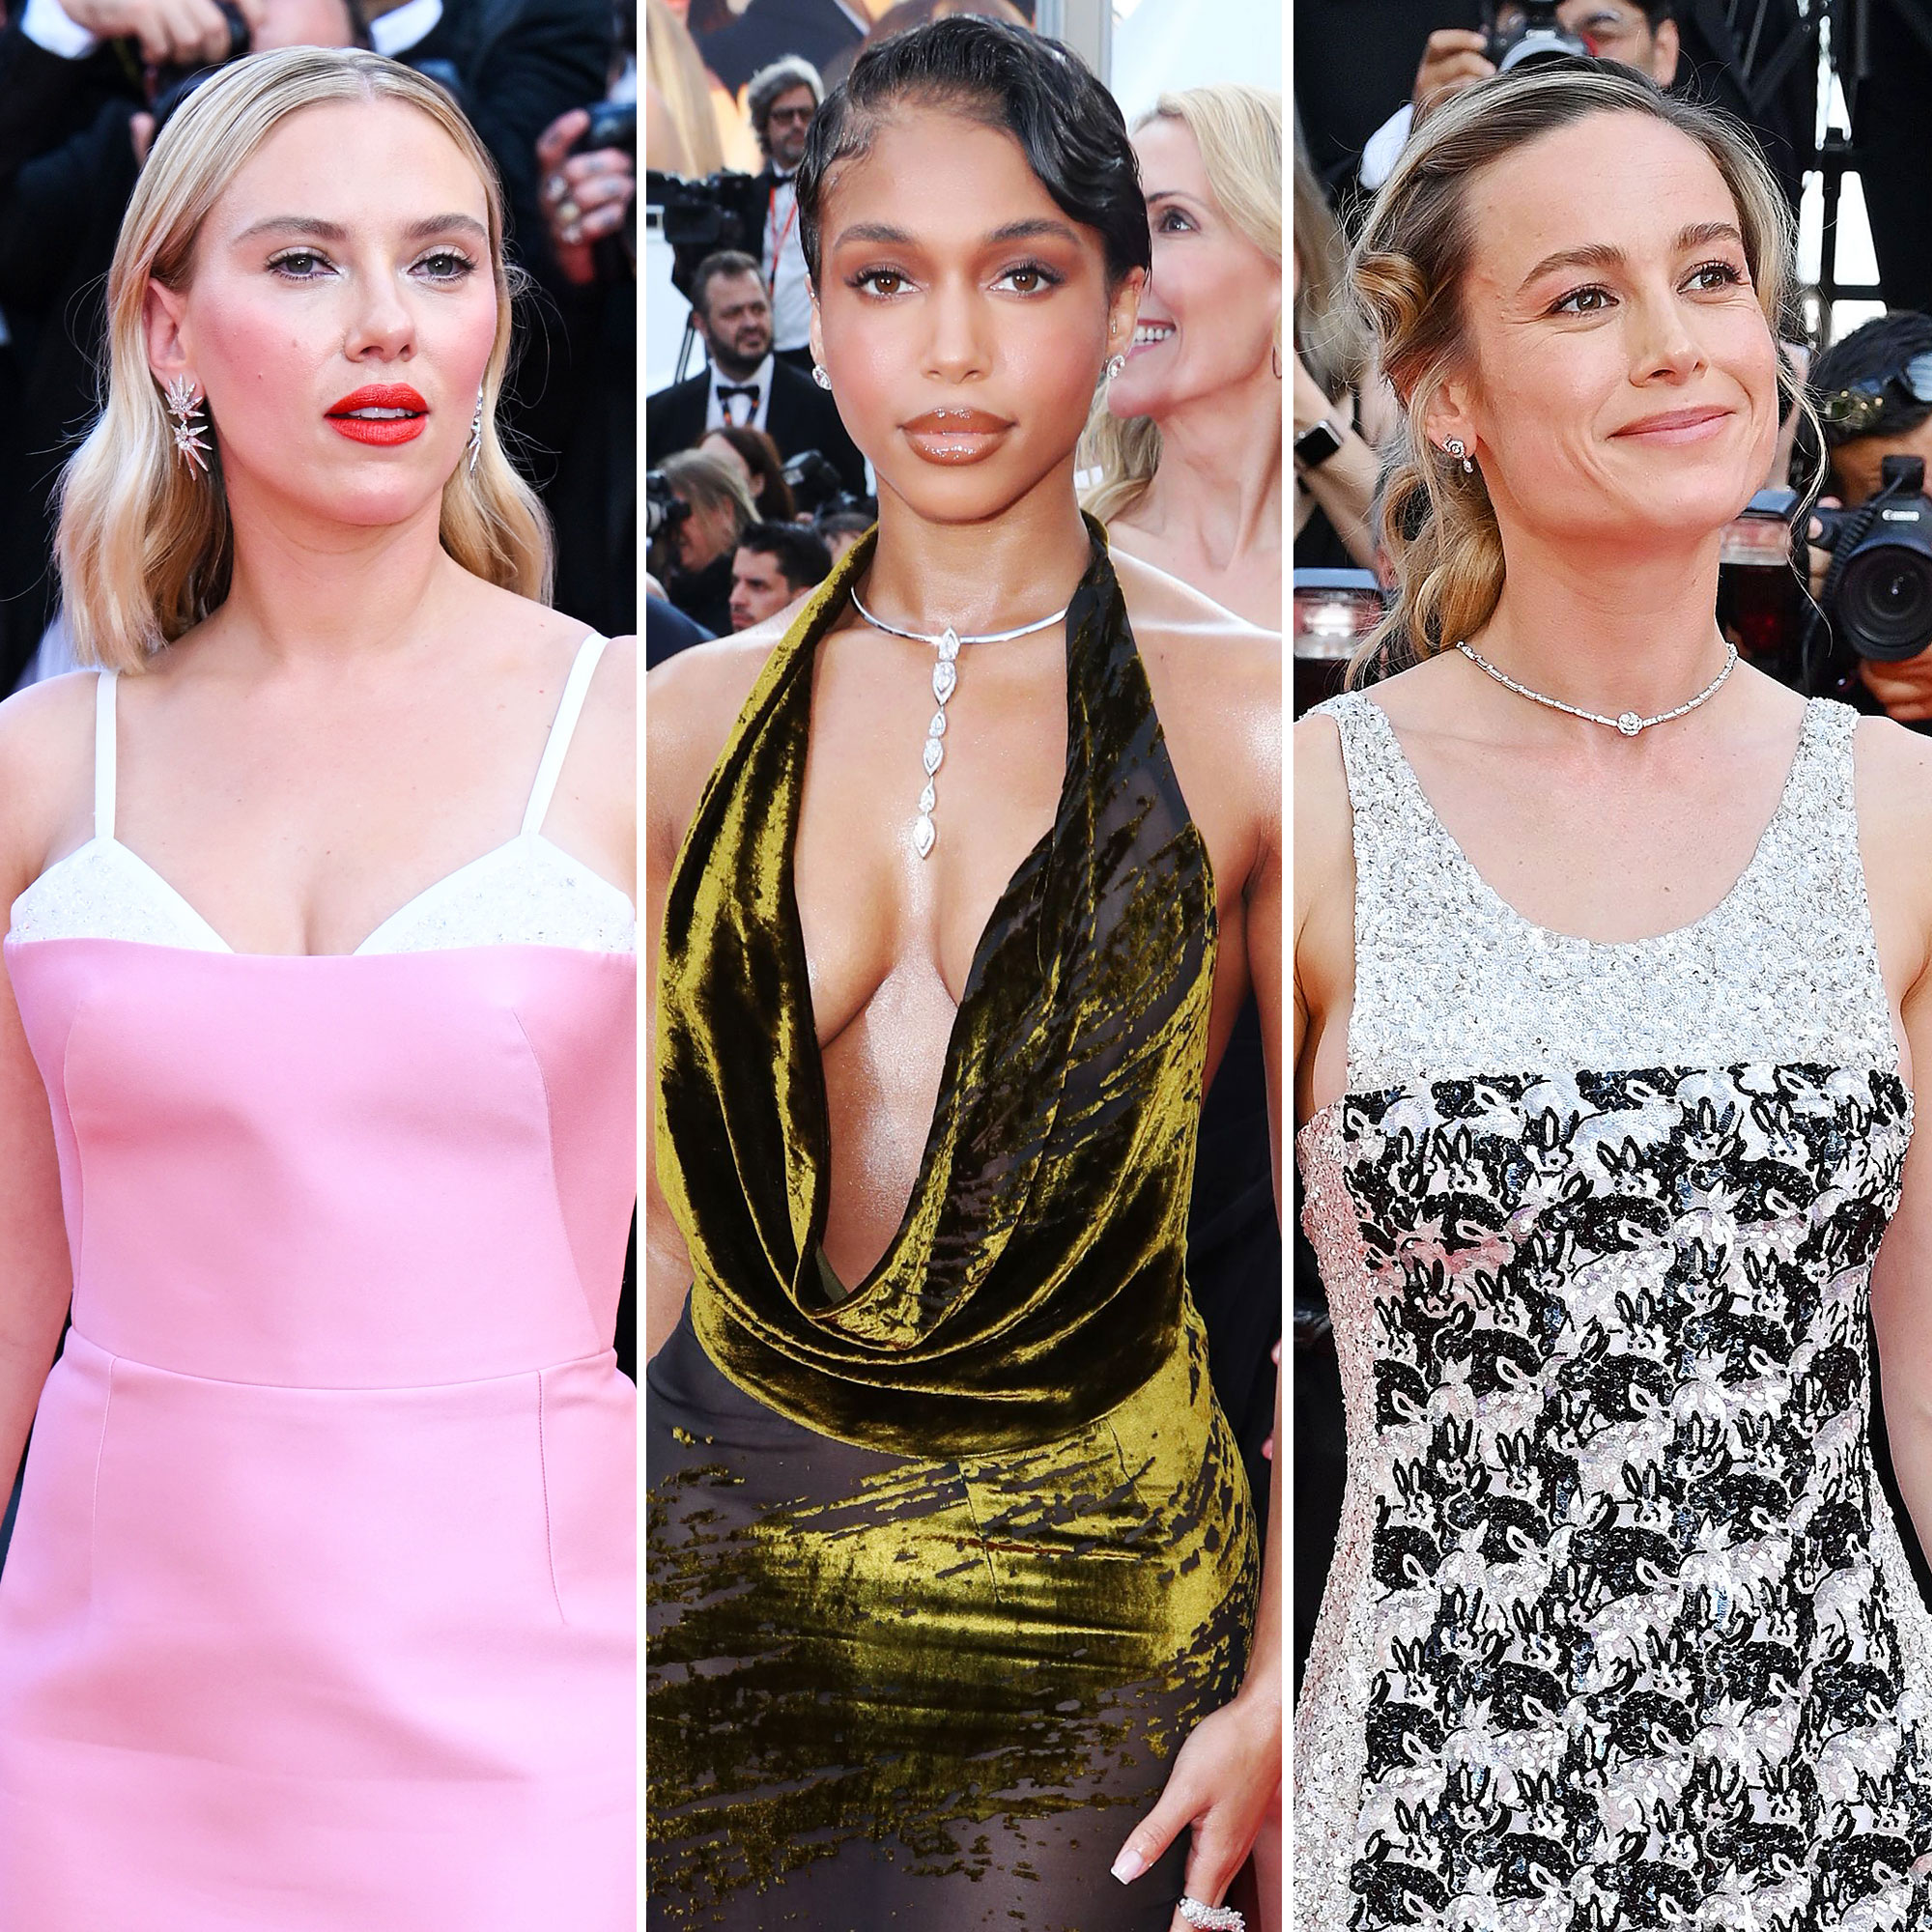 CELEBRITIES WEARING CHANEL AT THE CANNES FESTIVAL OPENING CEREMONY